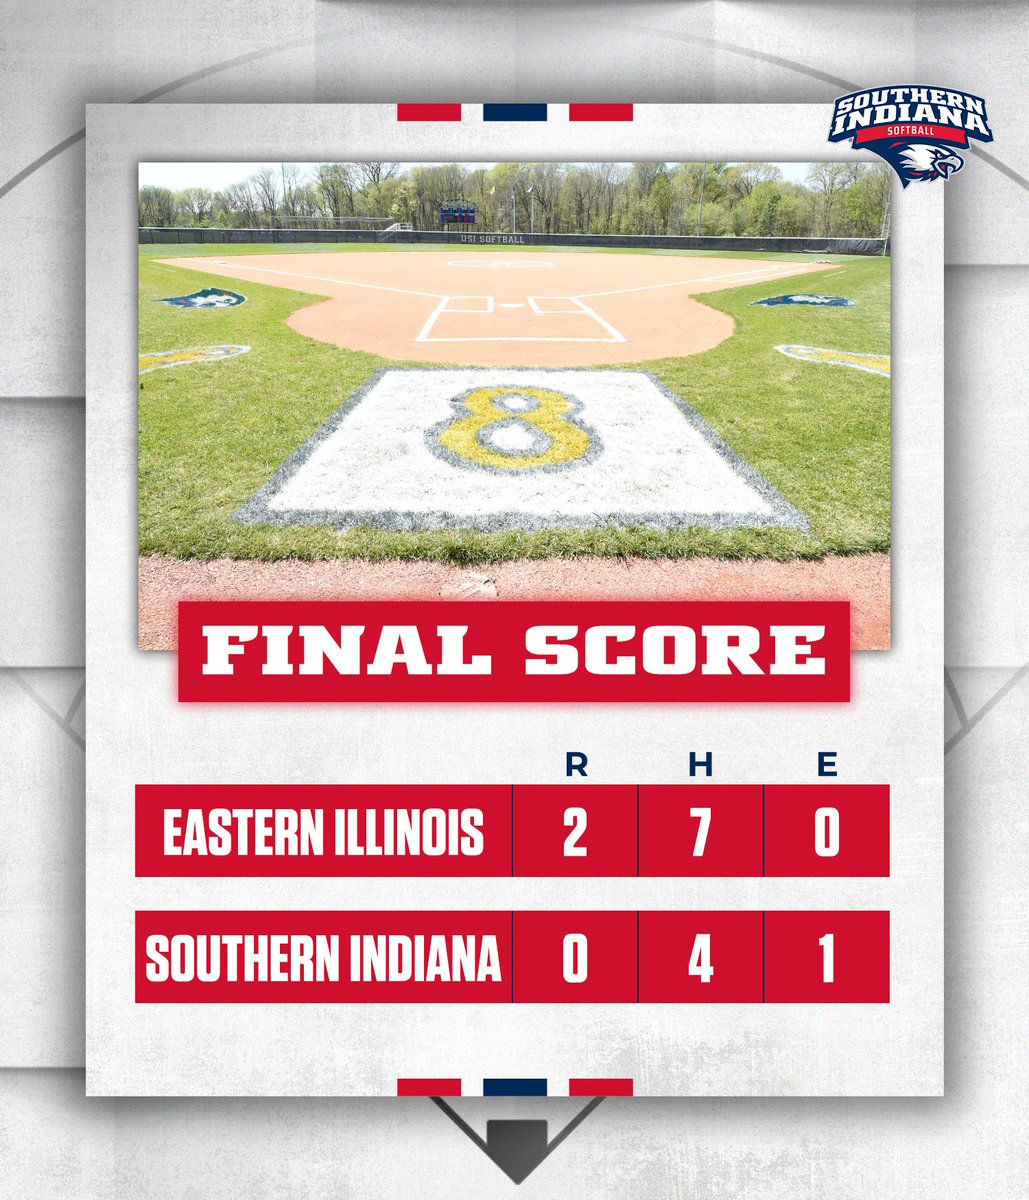 @USISOFTBALL 🥎🦅 FINAL Not the result @USISOFTBALL was hoping for. However, it was a memorable day at USI Softball Field, welcoming back alumni and honoring the late alumna Courtney Schoolcraft. USI and EIU play again in a Noon doubleheader tomorrow. #GoUSIEagles #OVCit